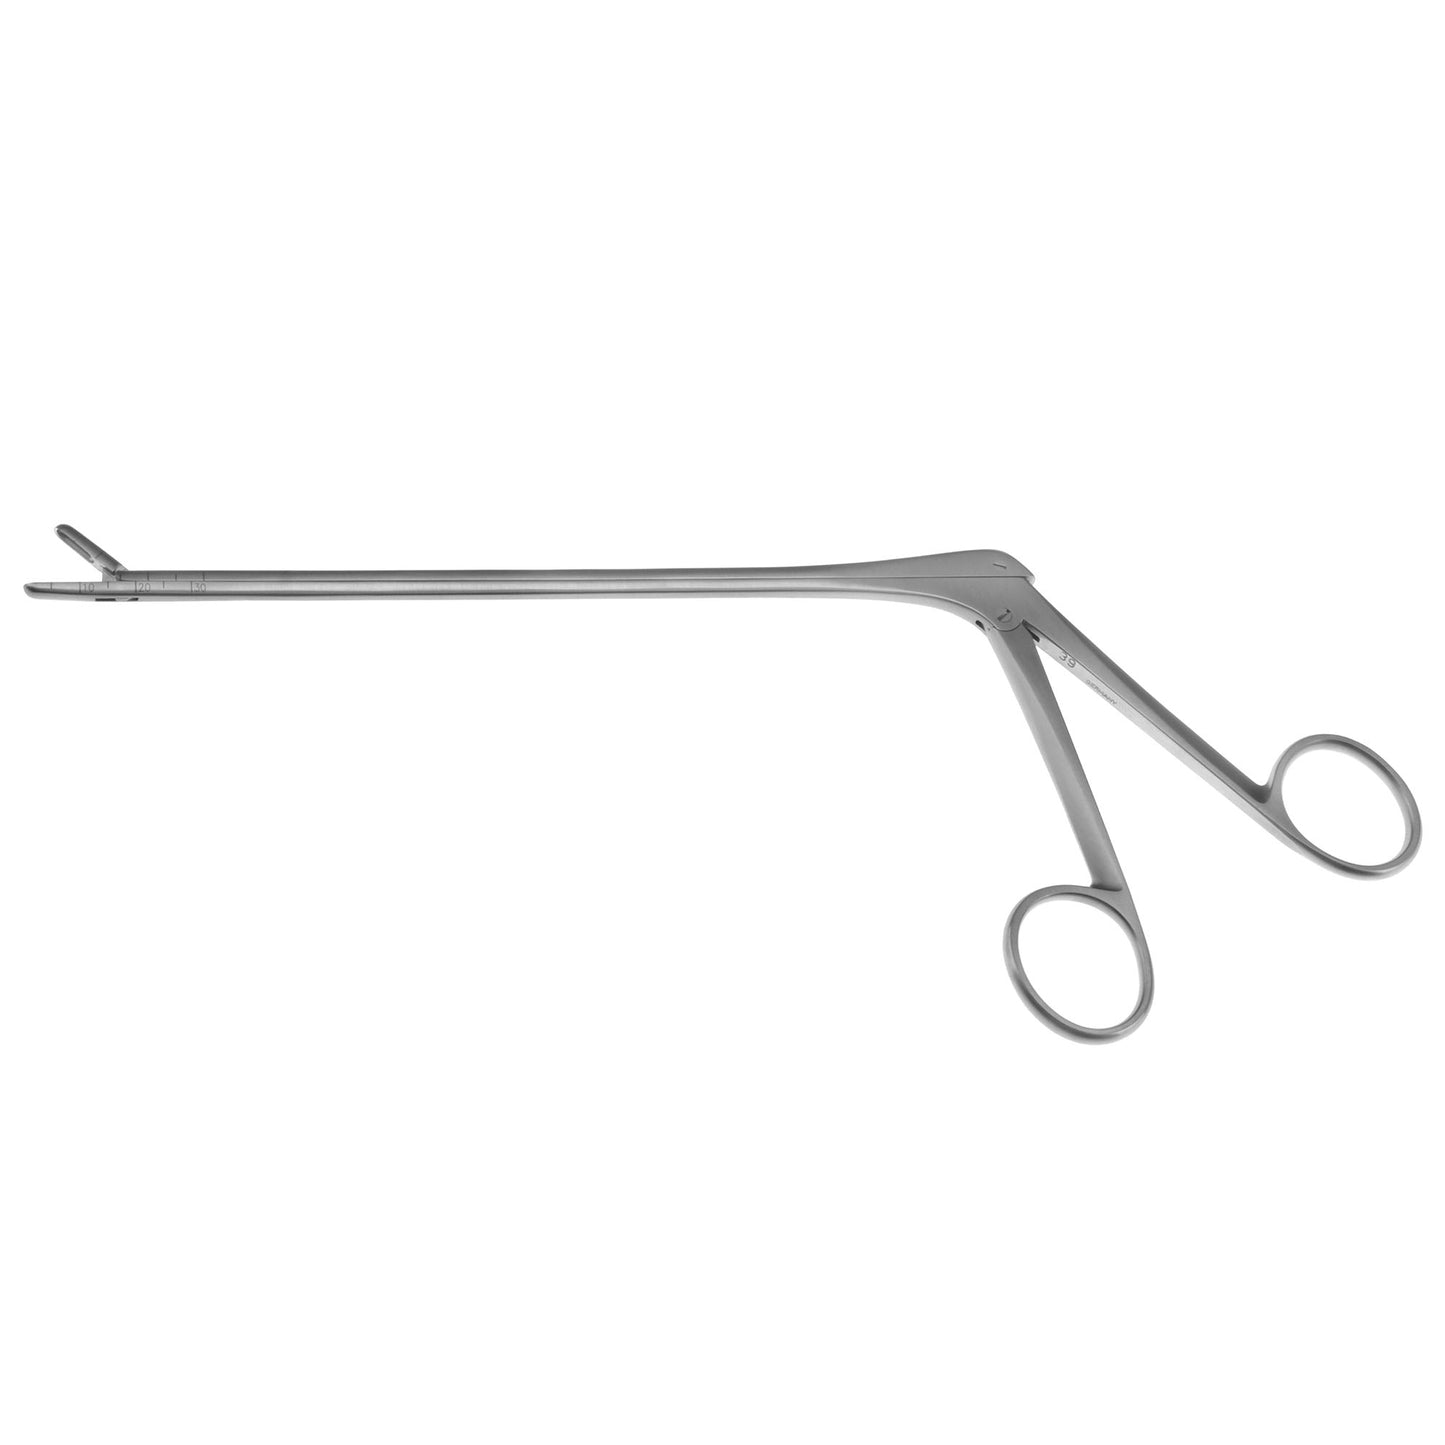 MIS Rongeur, Pituitary, straight, graduated 4mm jaw, 7 1/4&#8243;